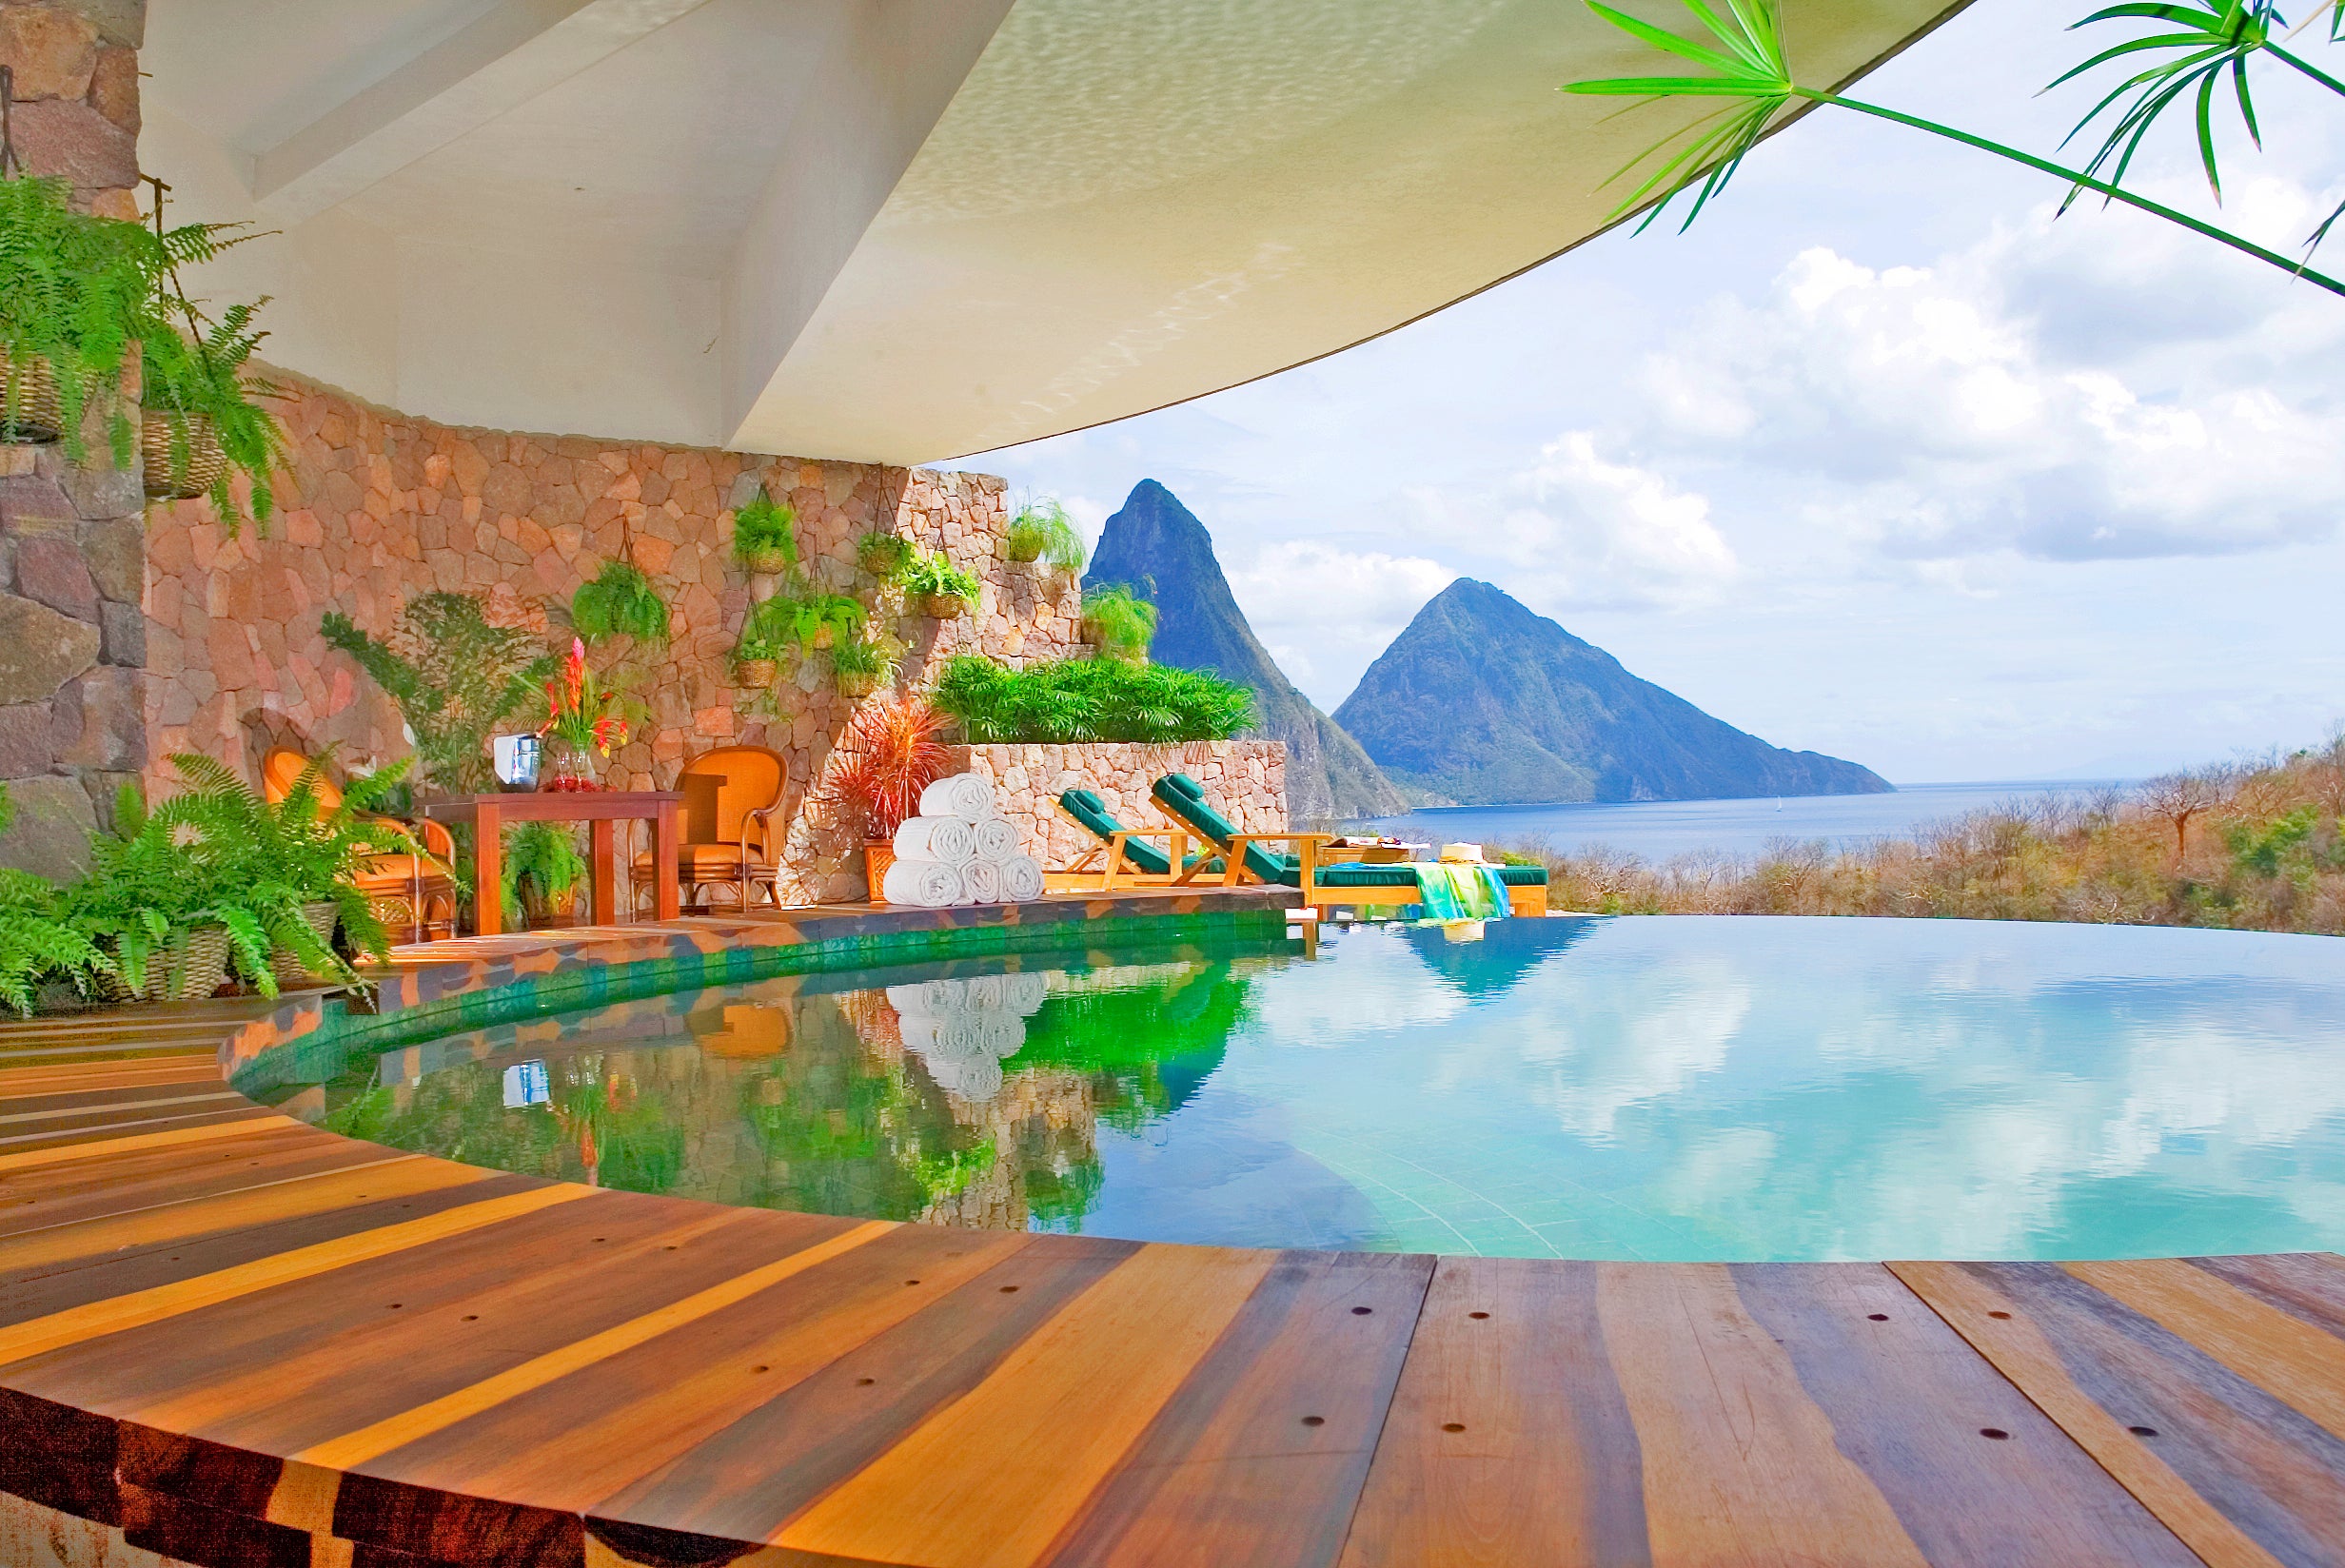 The infinity pool is just one of the many pools you can soak in here